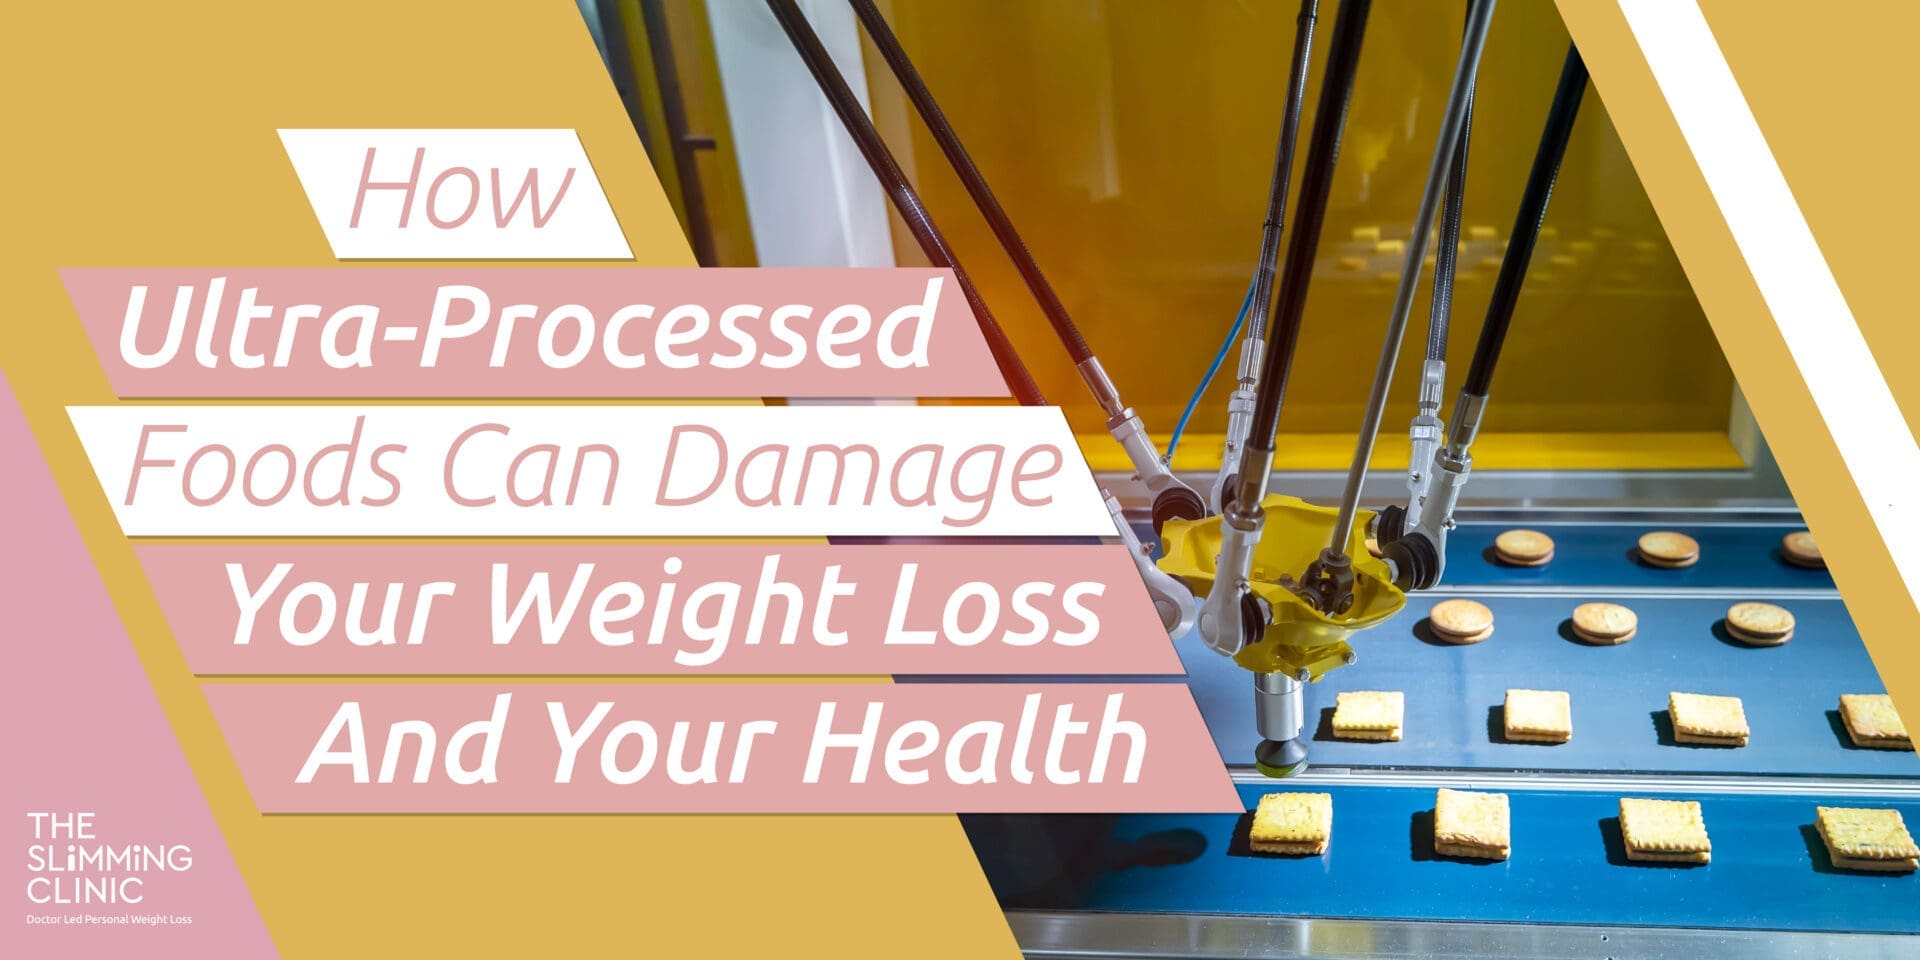 How Ultra-Processed Foods Can Damage Your Weight Loss And Your Health